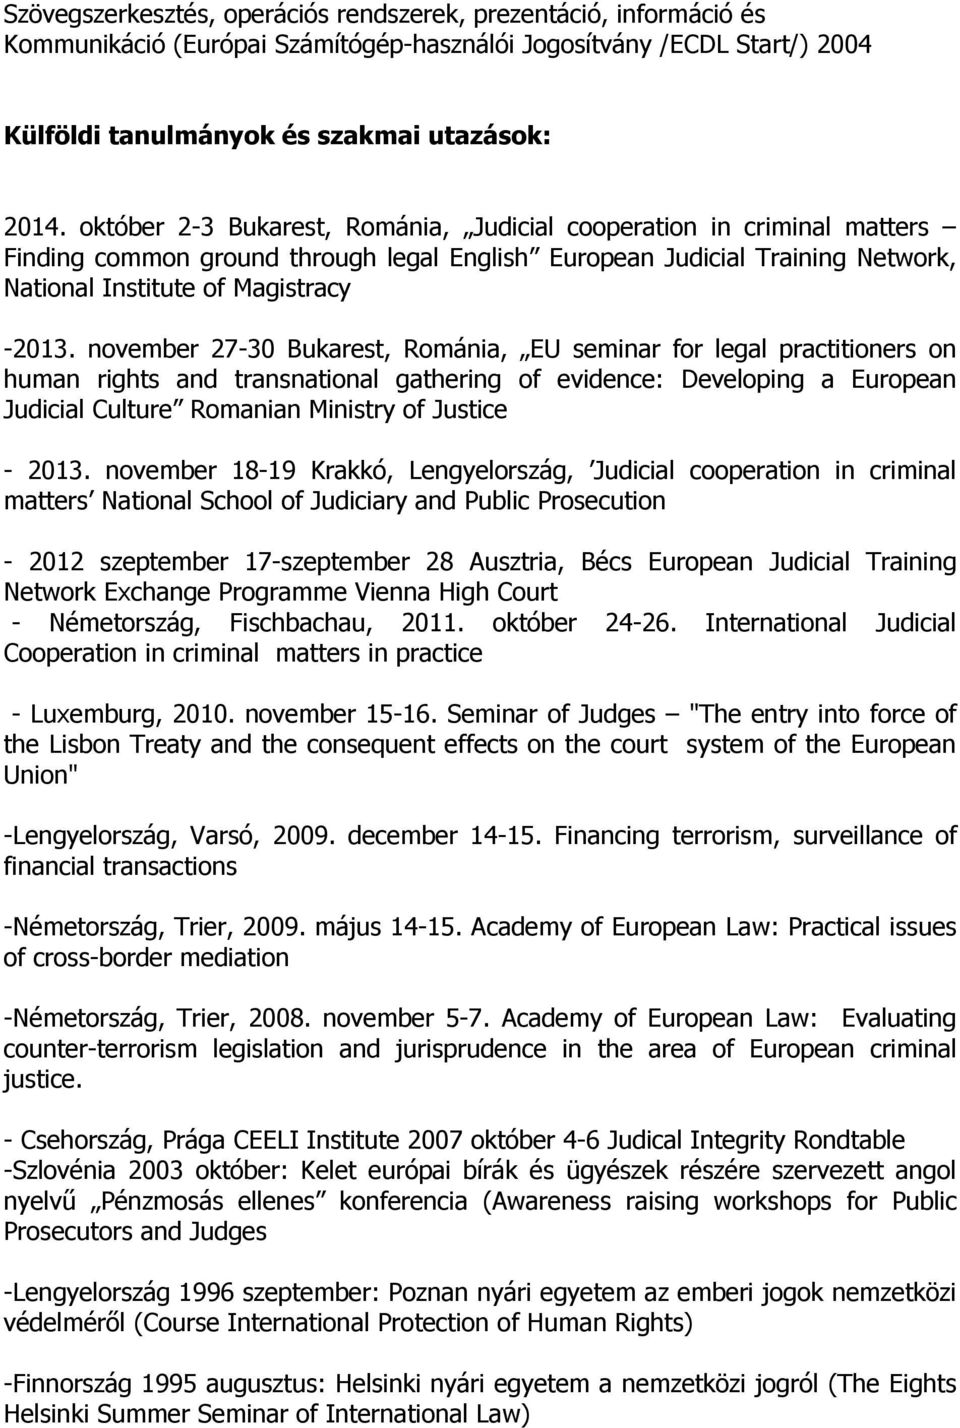 november 27-30 Bukarest, Románia, EU seminar for legal practitioners on human rights and transnational gathering of evidence: Developing a European Judicial Culture Romanian Ministry of Justice -